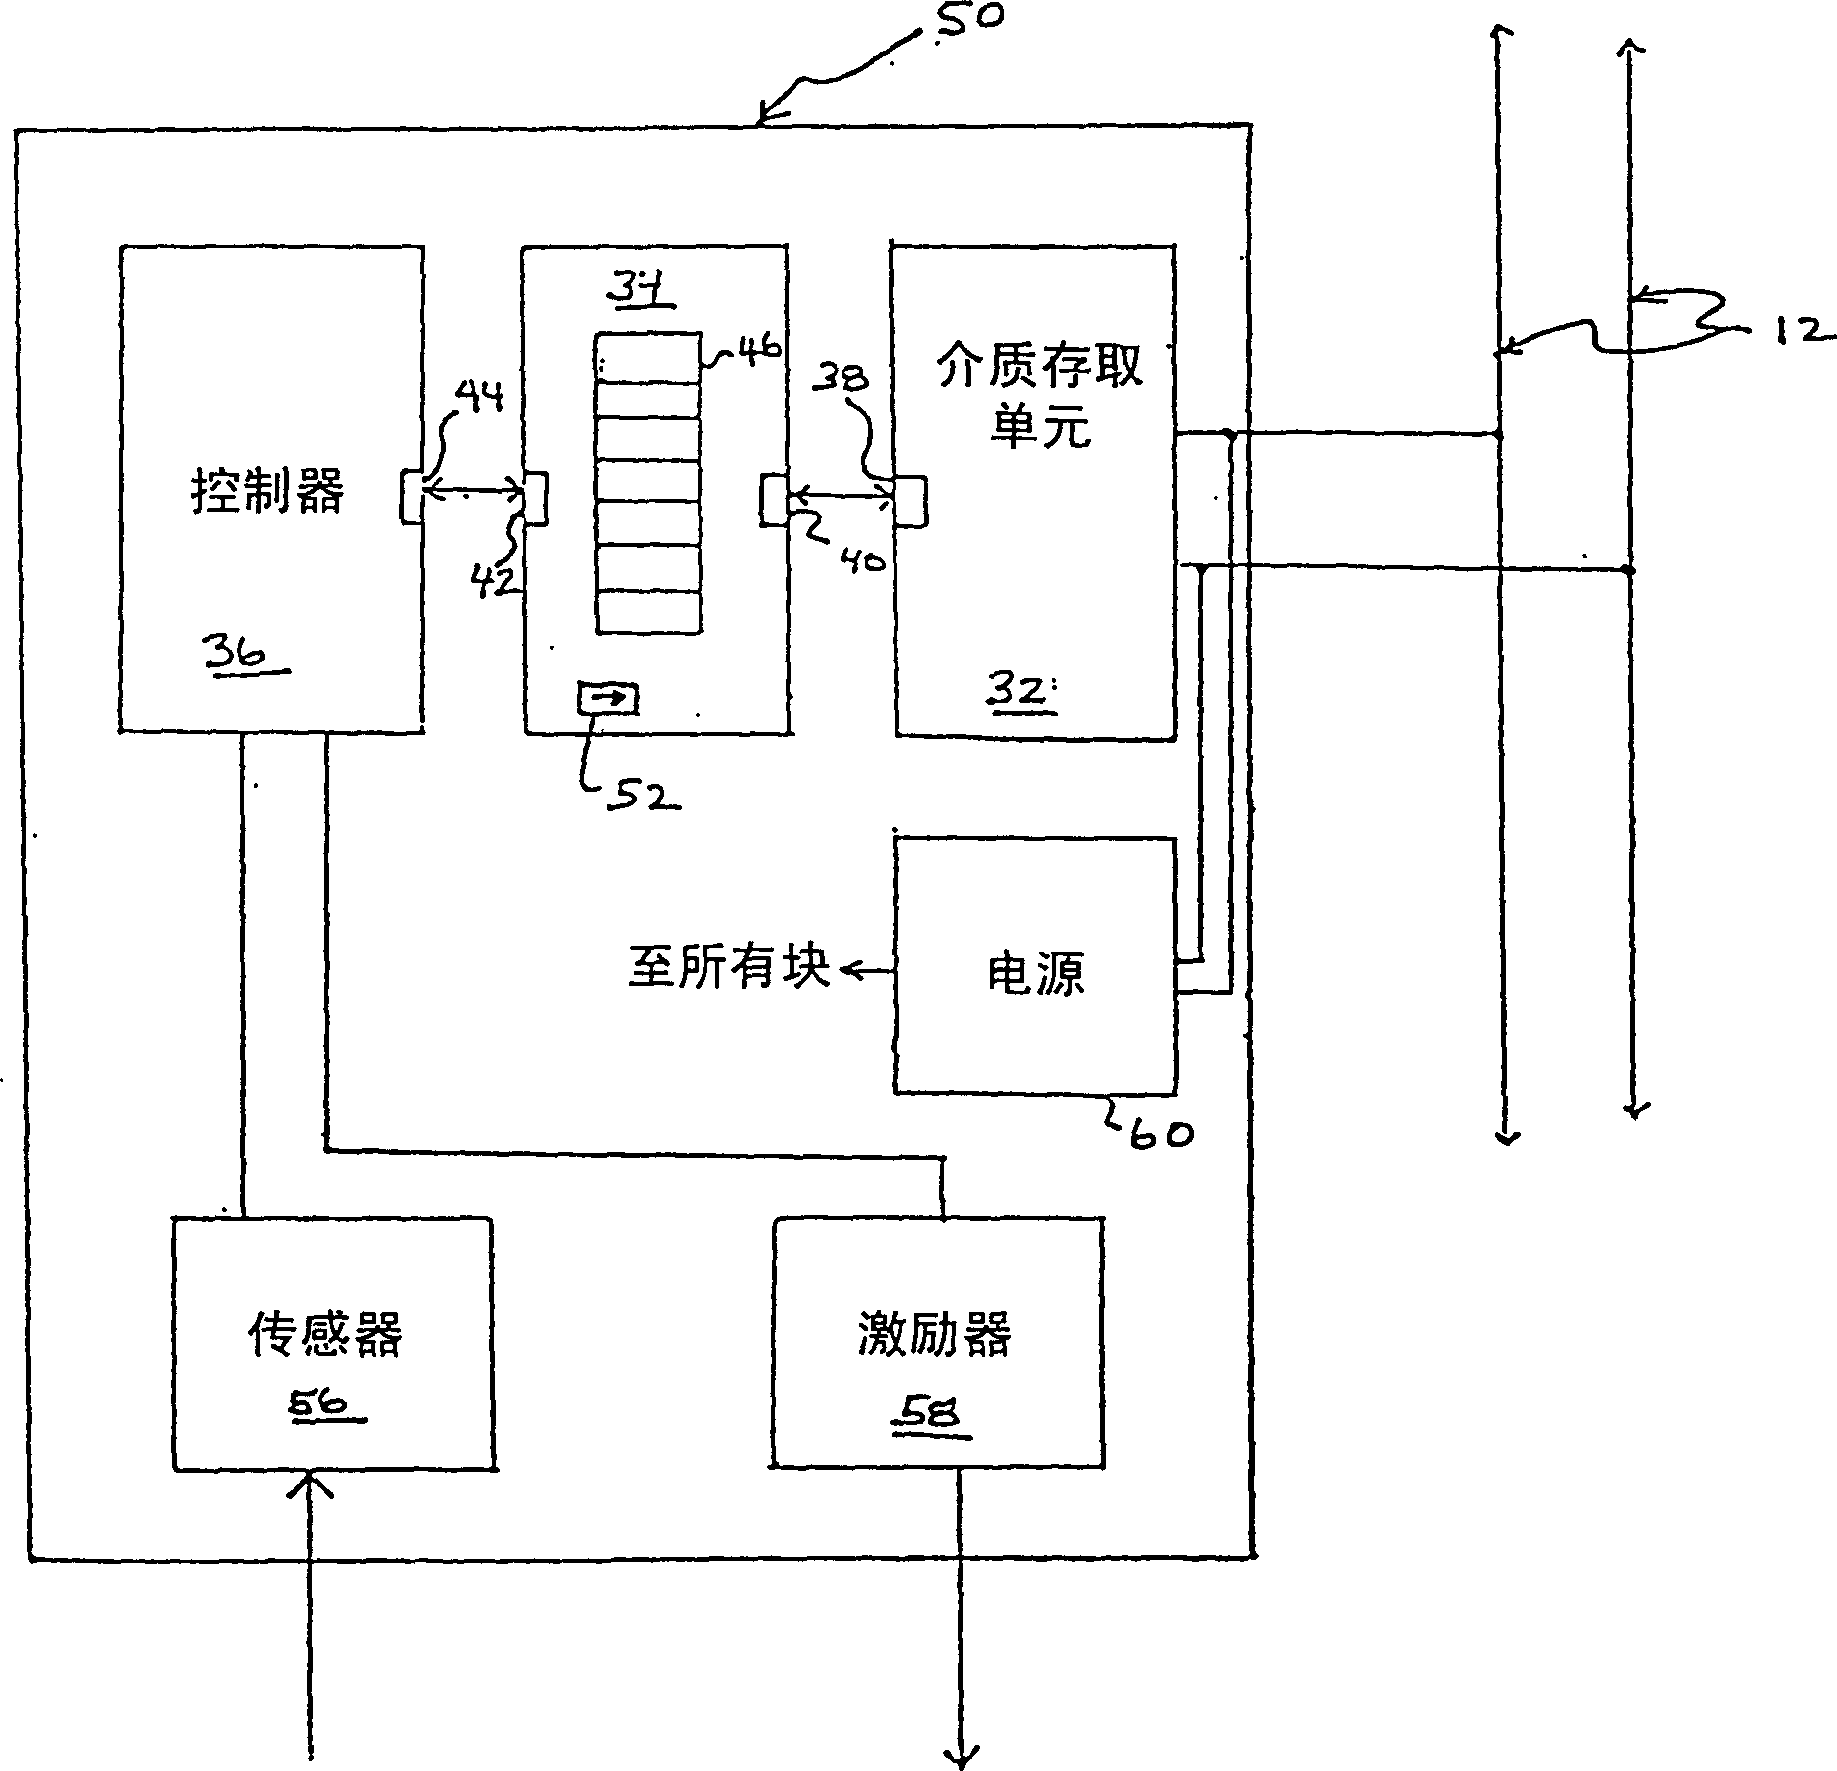 Fieldbus message queuing method and apparatus